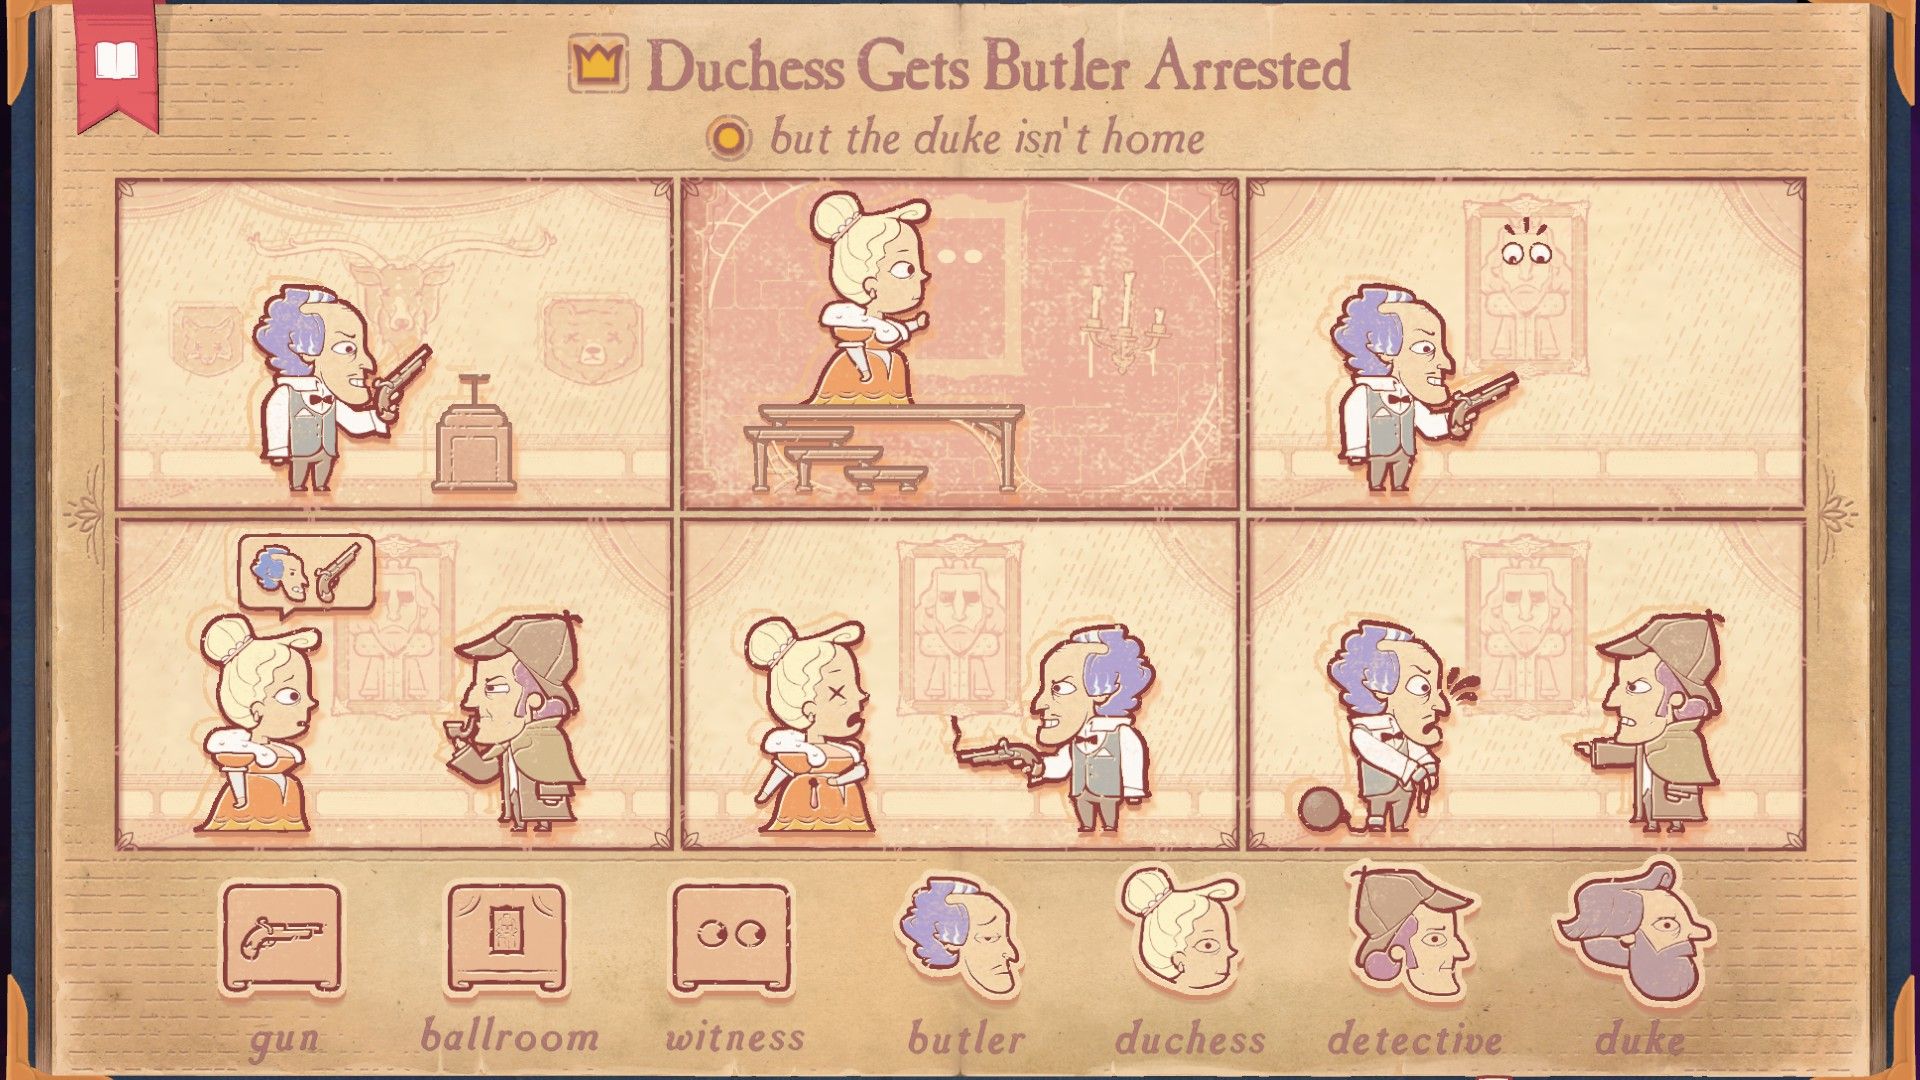 The solution for the Report section of Storyteller, showing Duchess getting Butler arrested without the Duke home.